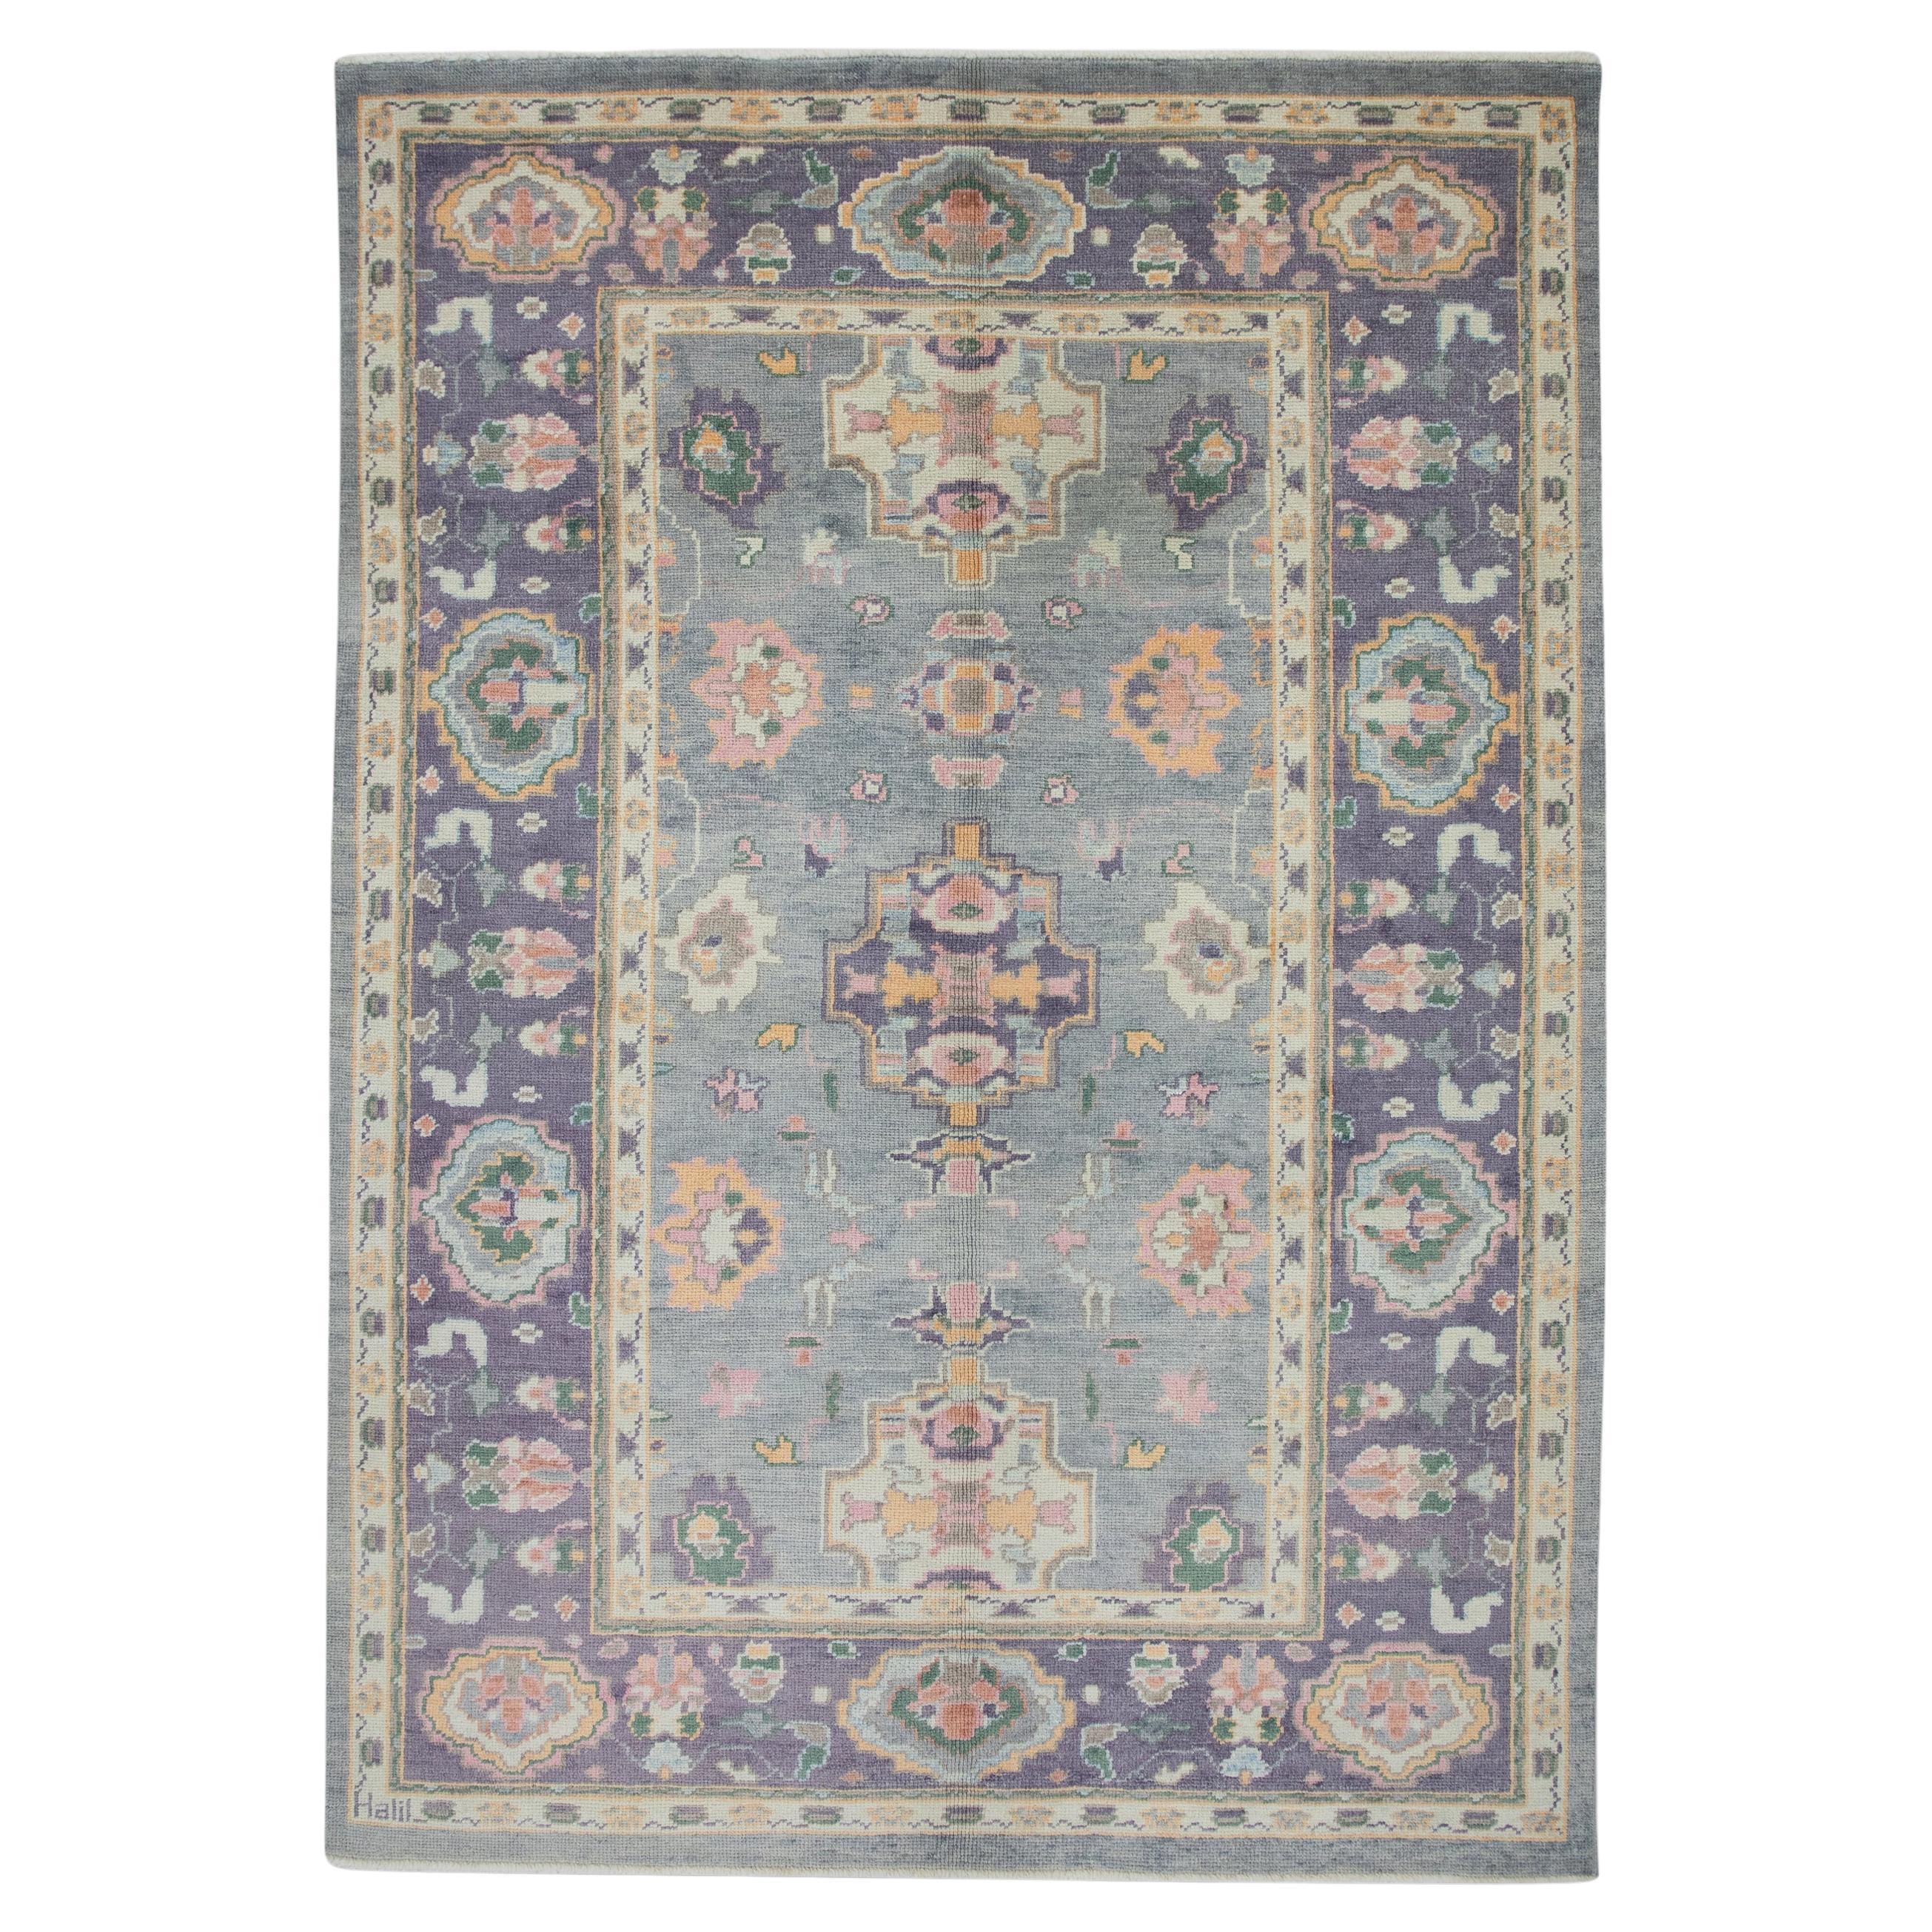 Purple and Pink Floral Design Handwoven Wool Turkish Oushak Rug 6'4" x 9'2"